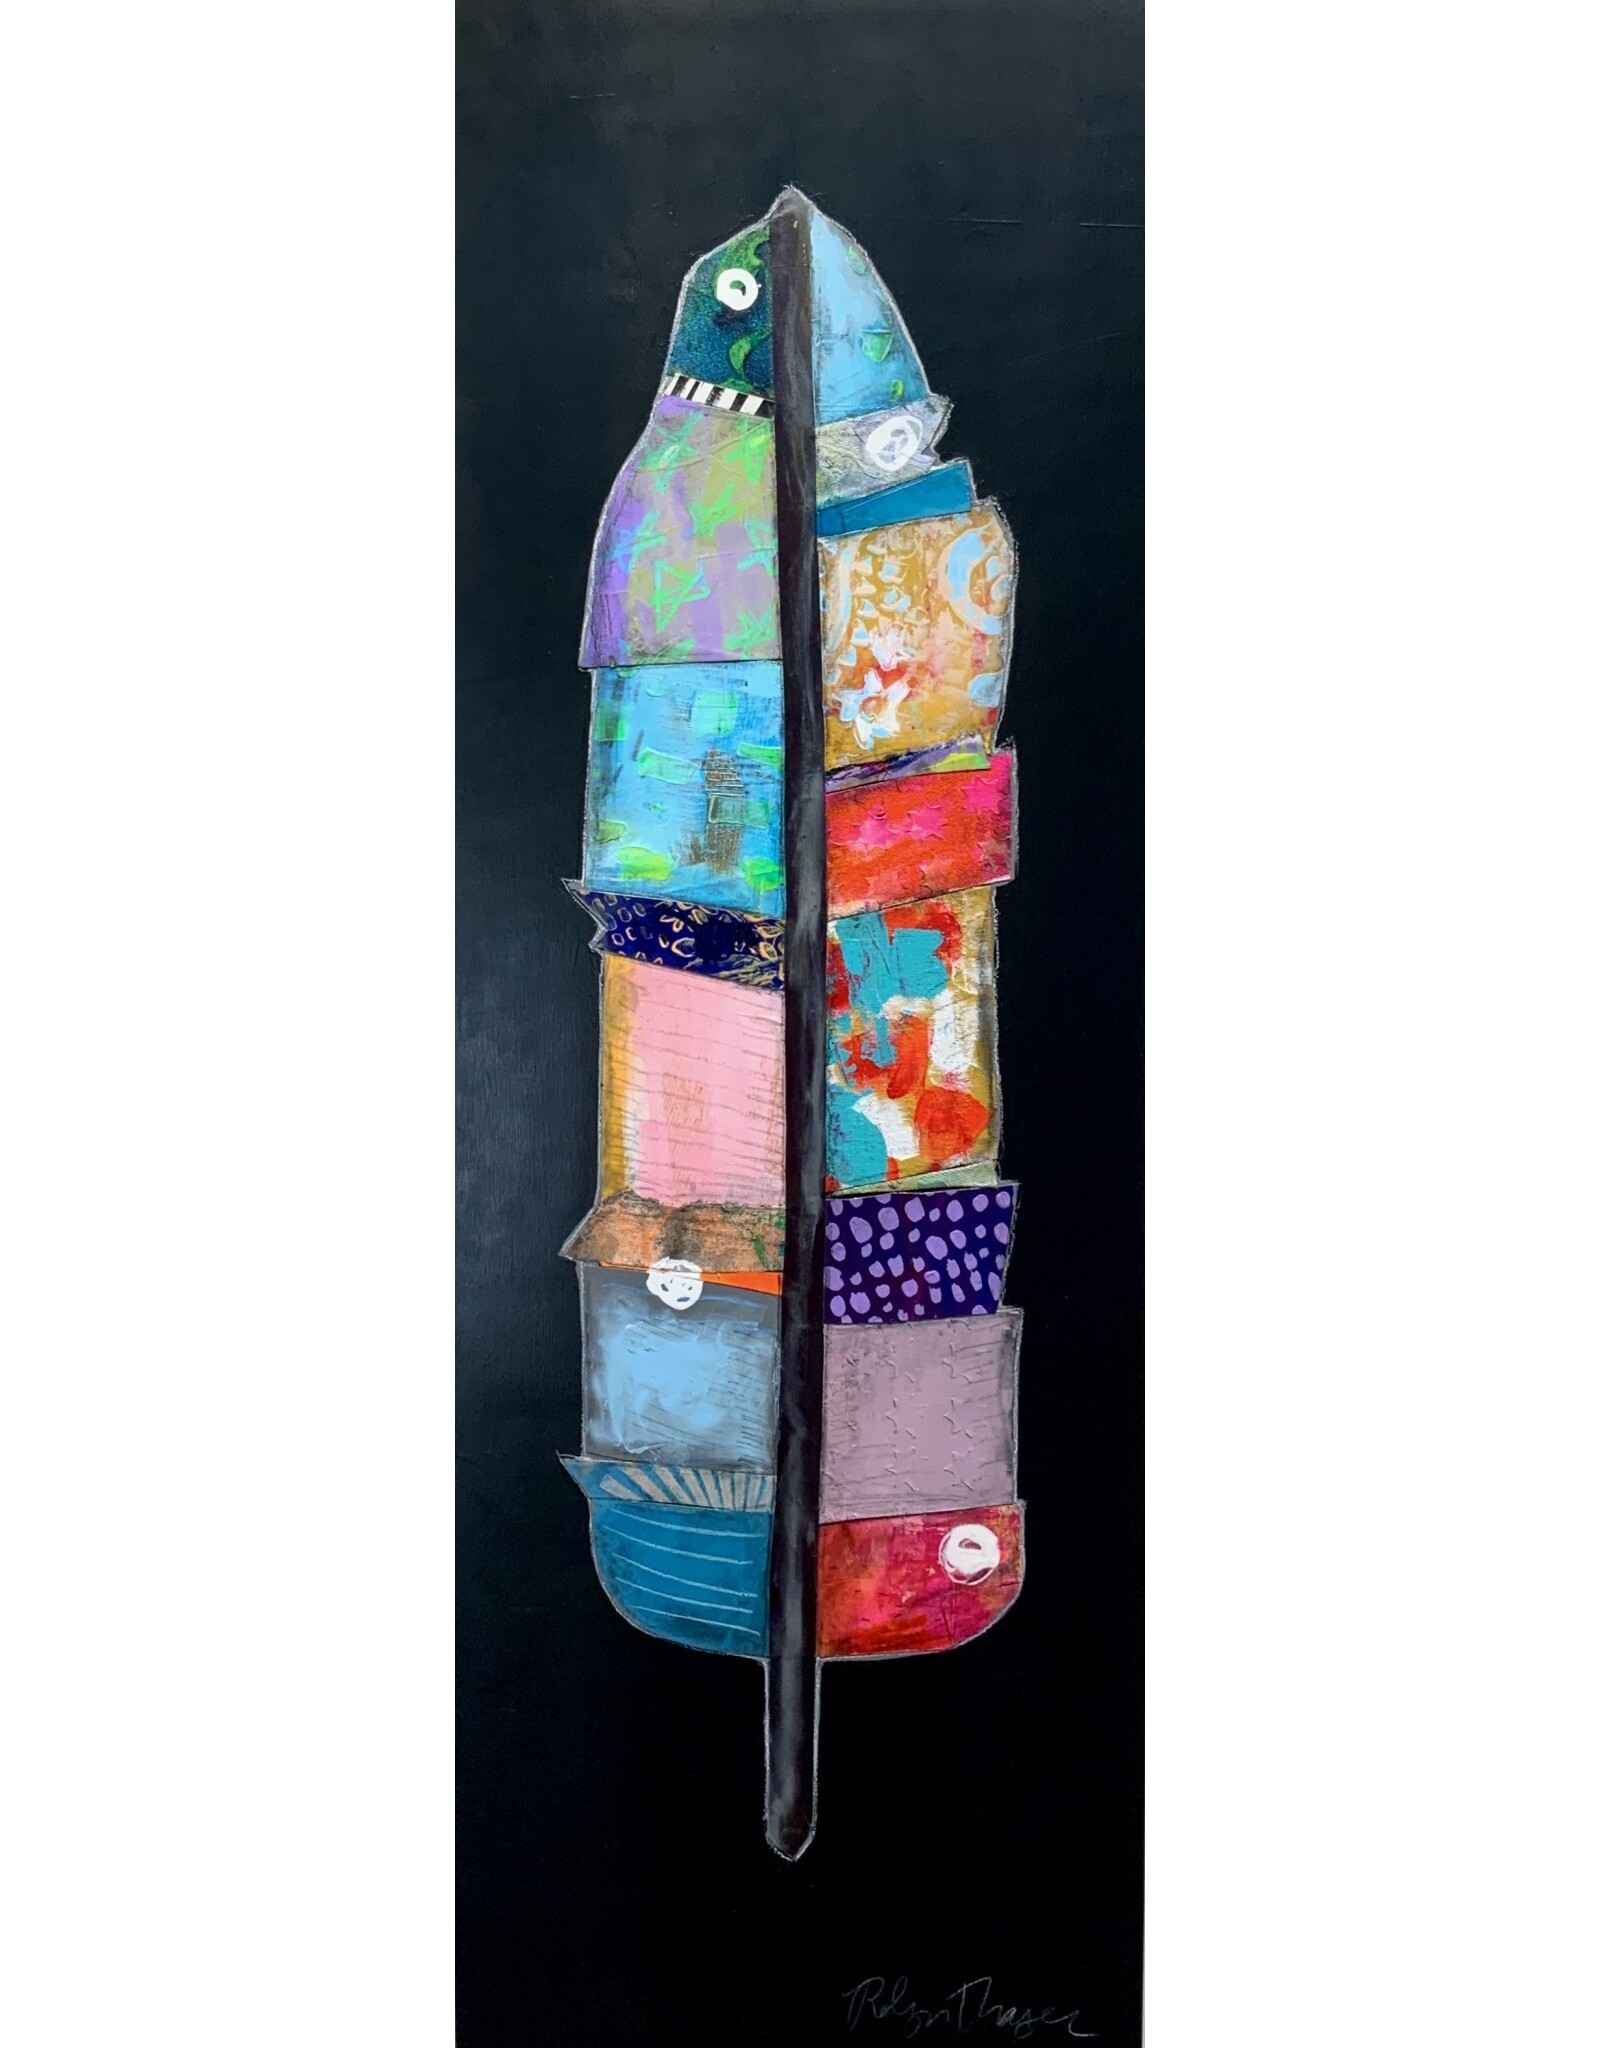 Robyn Thayer Feather 60 - 36 x 12 inches - Mixed Media Painting - RT